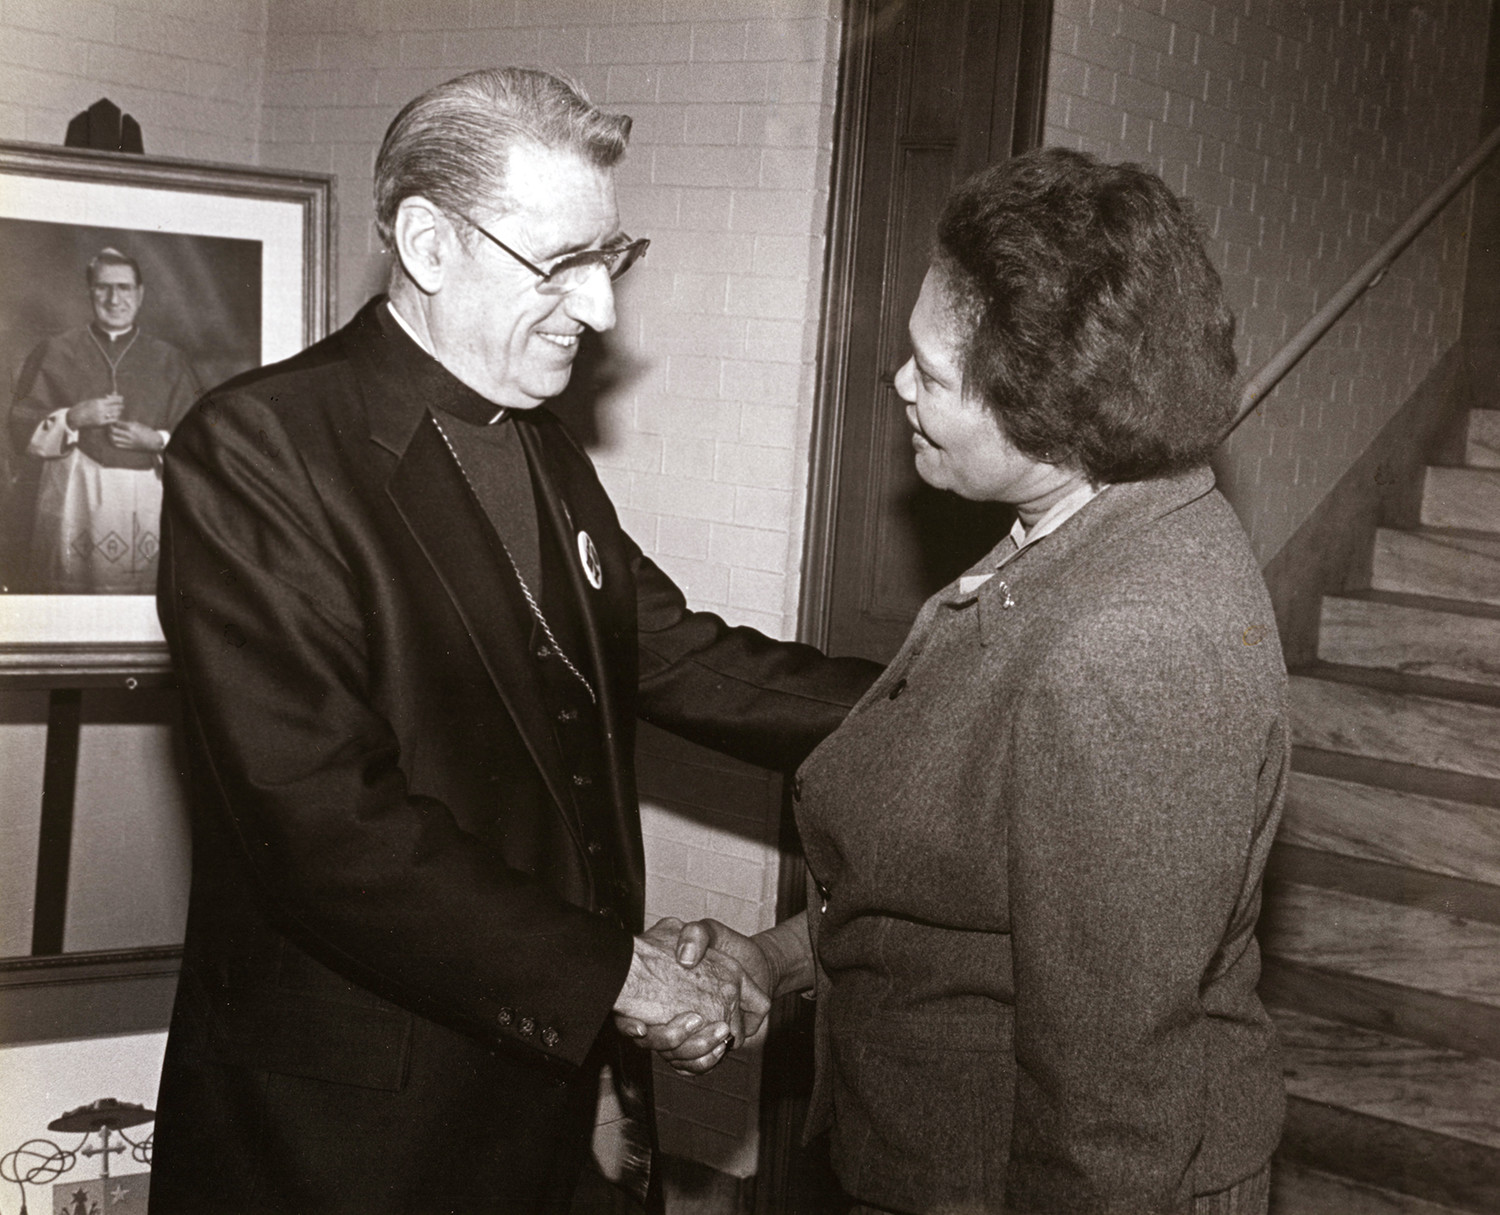 Cardinal John O’Connor greets Dolores B. Grier in 1984. The next year he appointed her vice chancellor for community relations in the archdiocese. Miss Grier died Feb. 22.